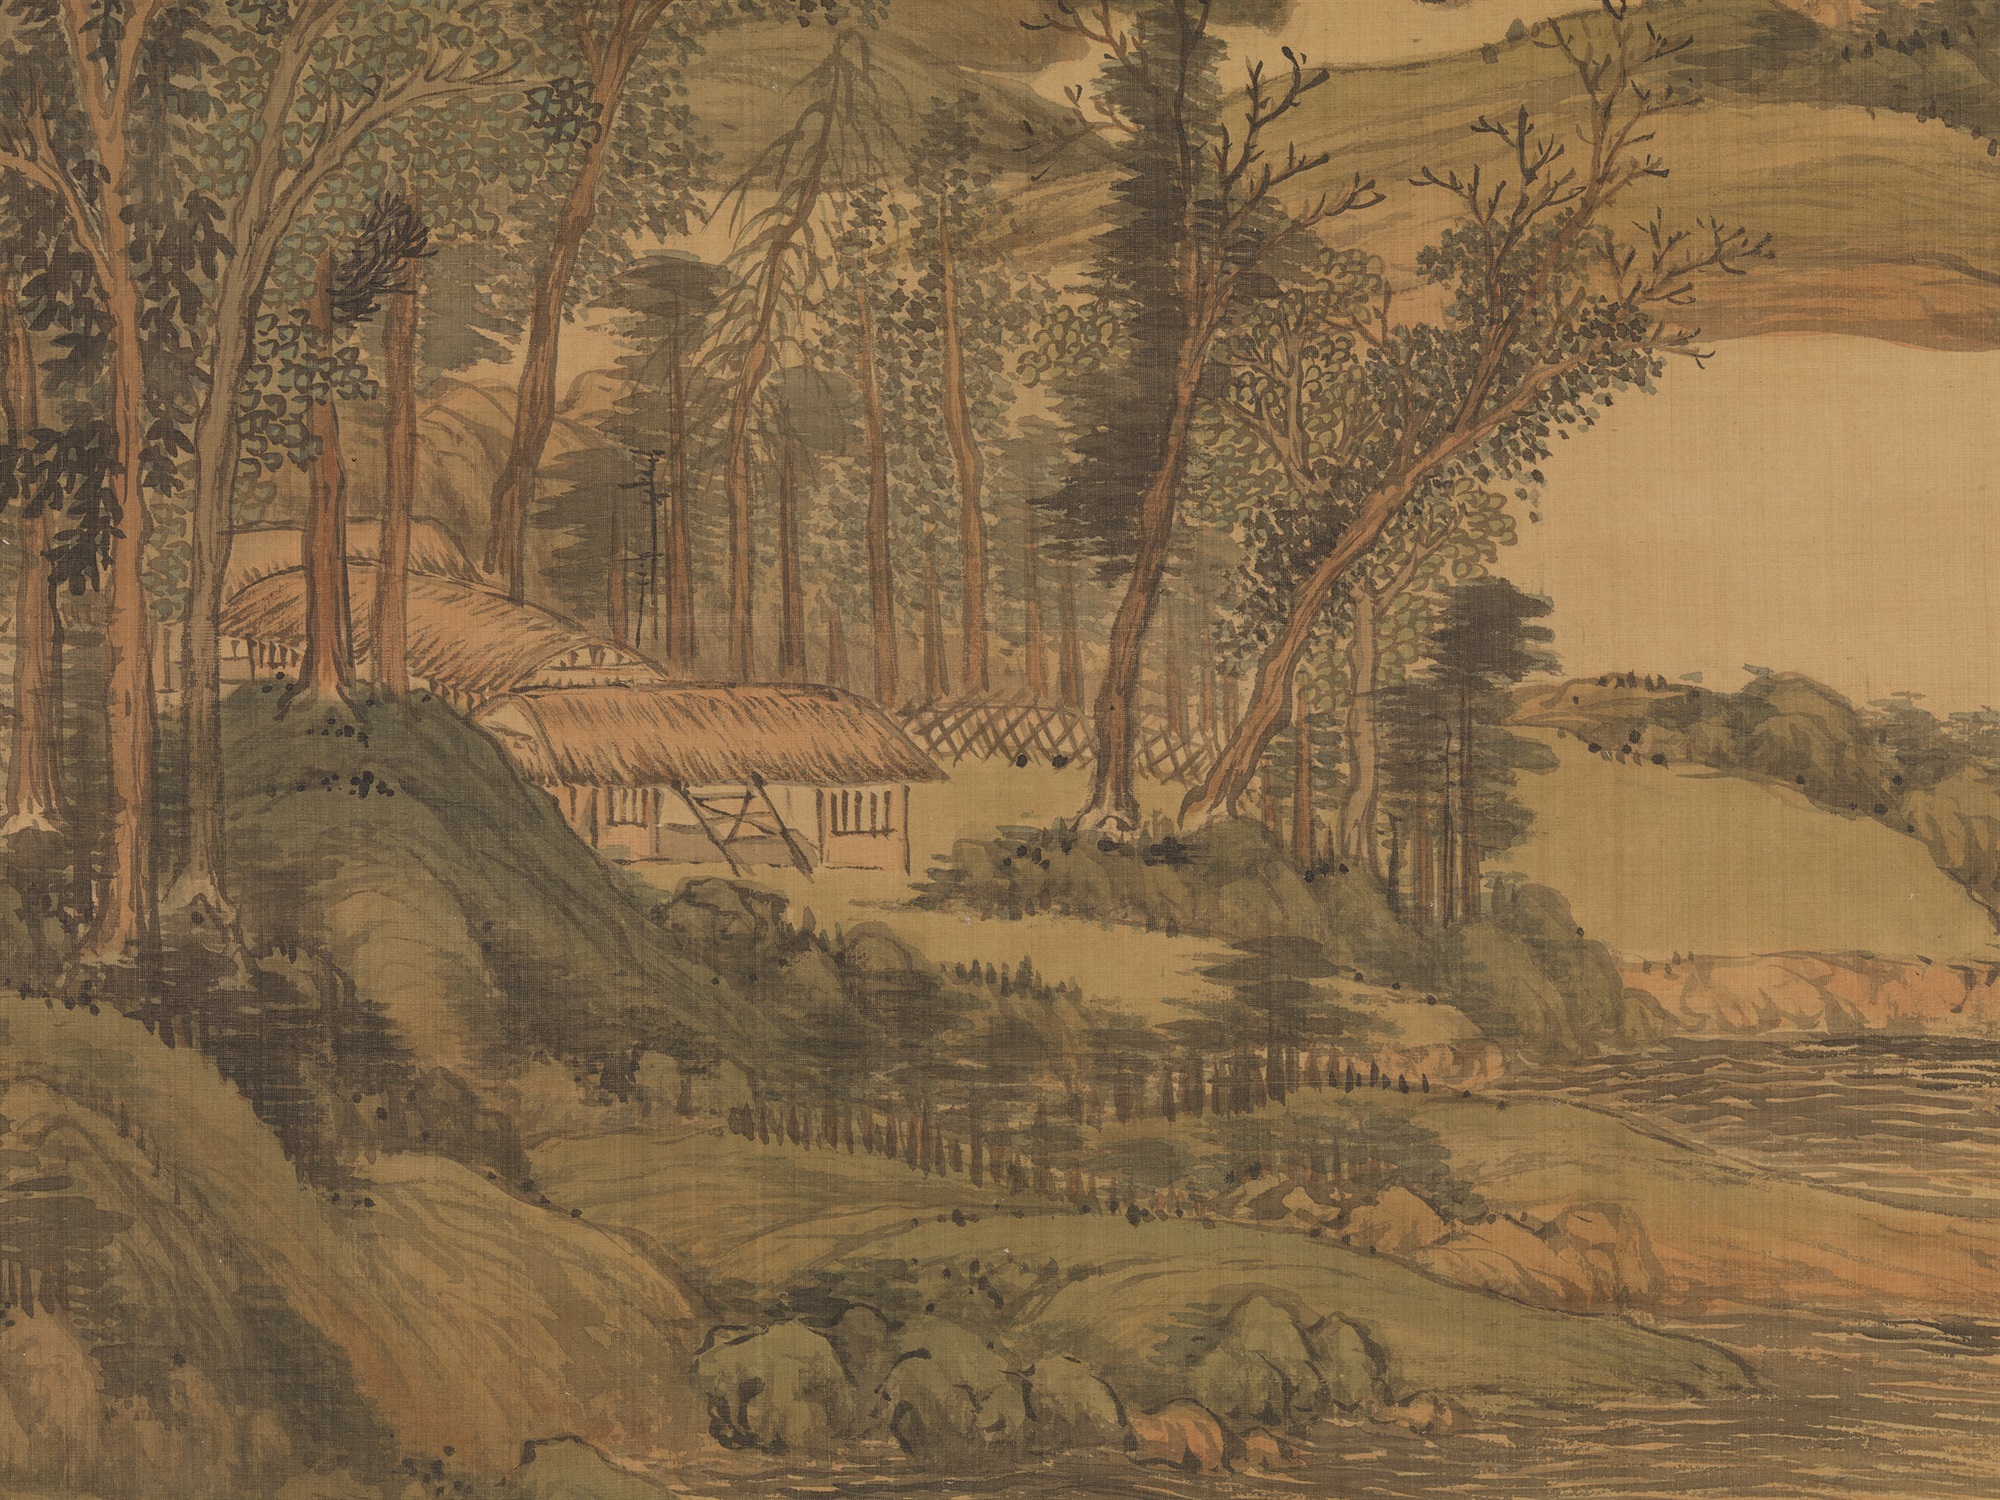 Landscape in the Style of Huang Gongwang